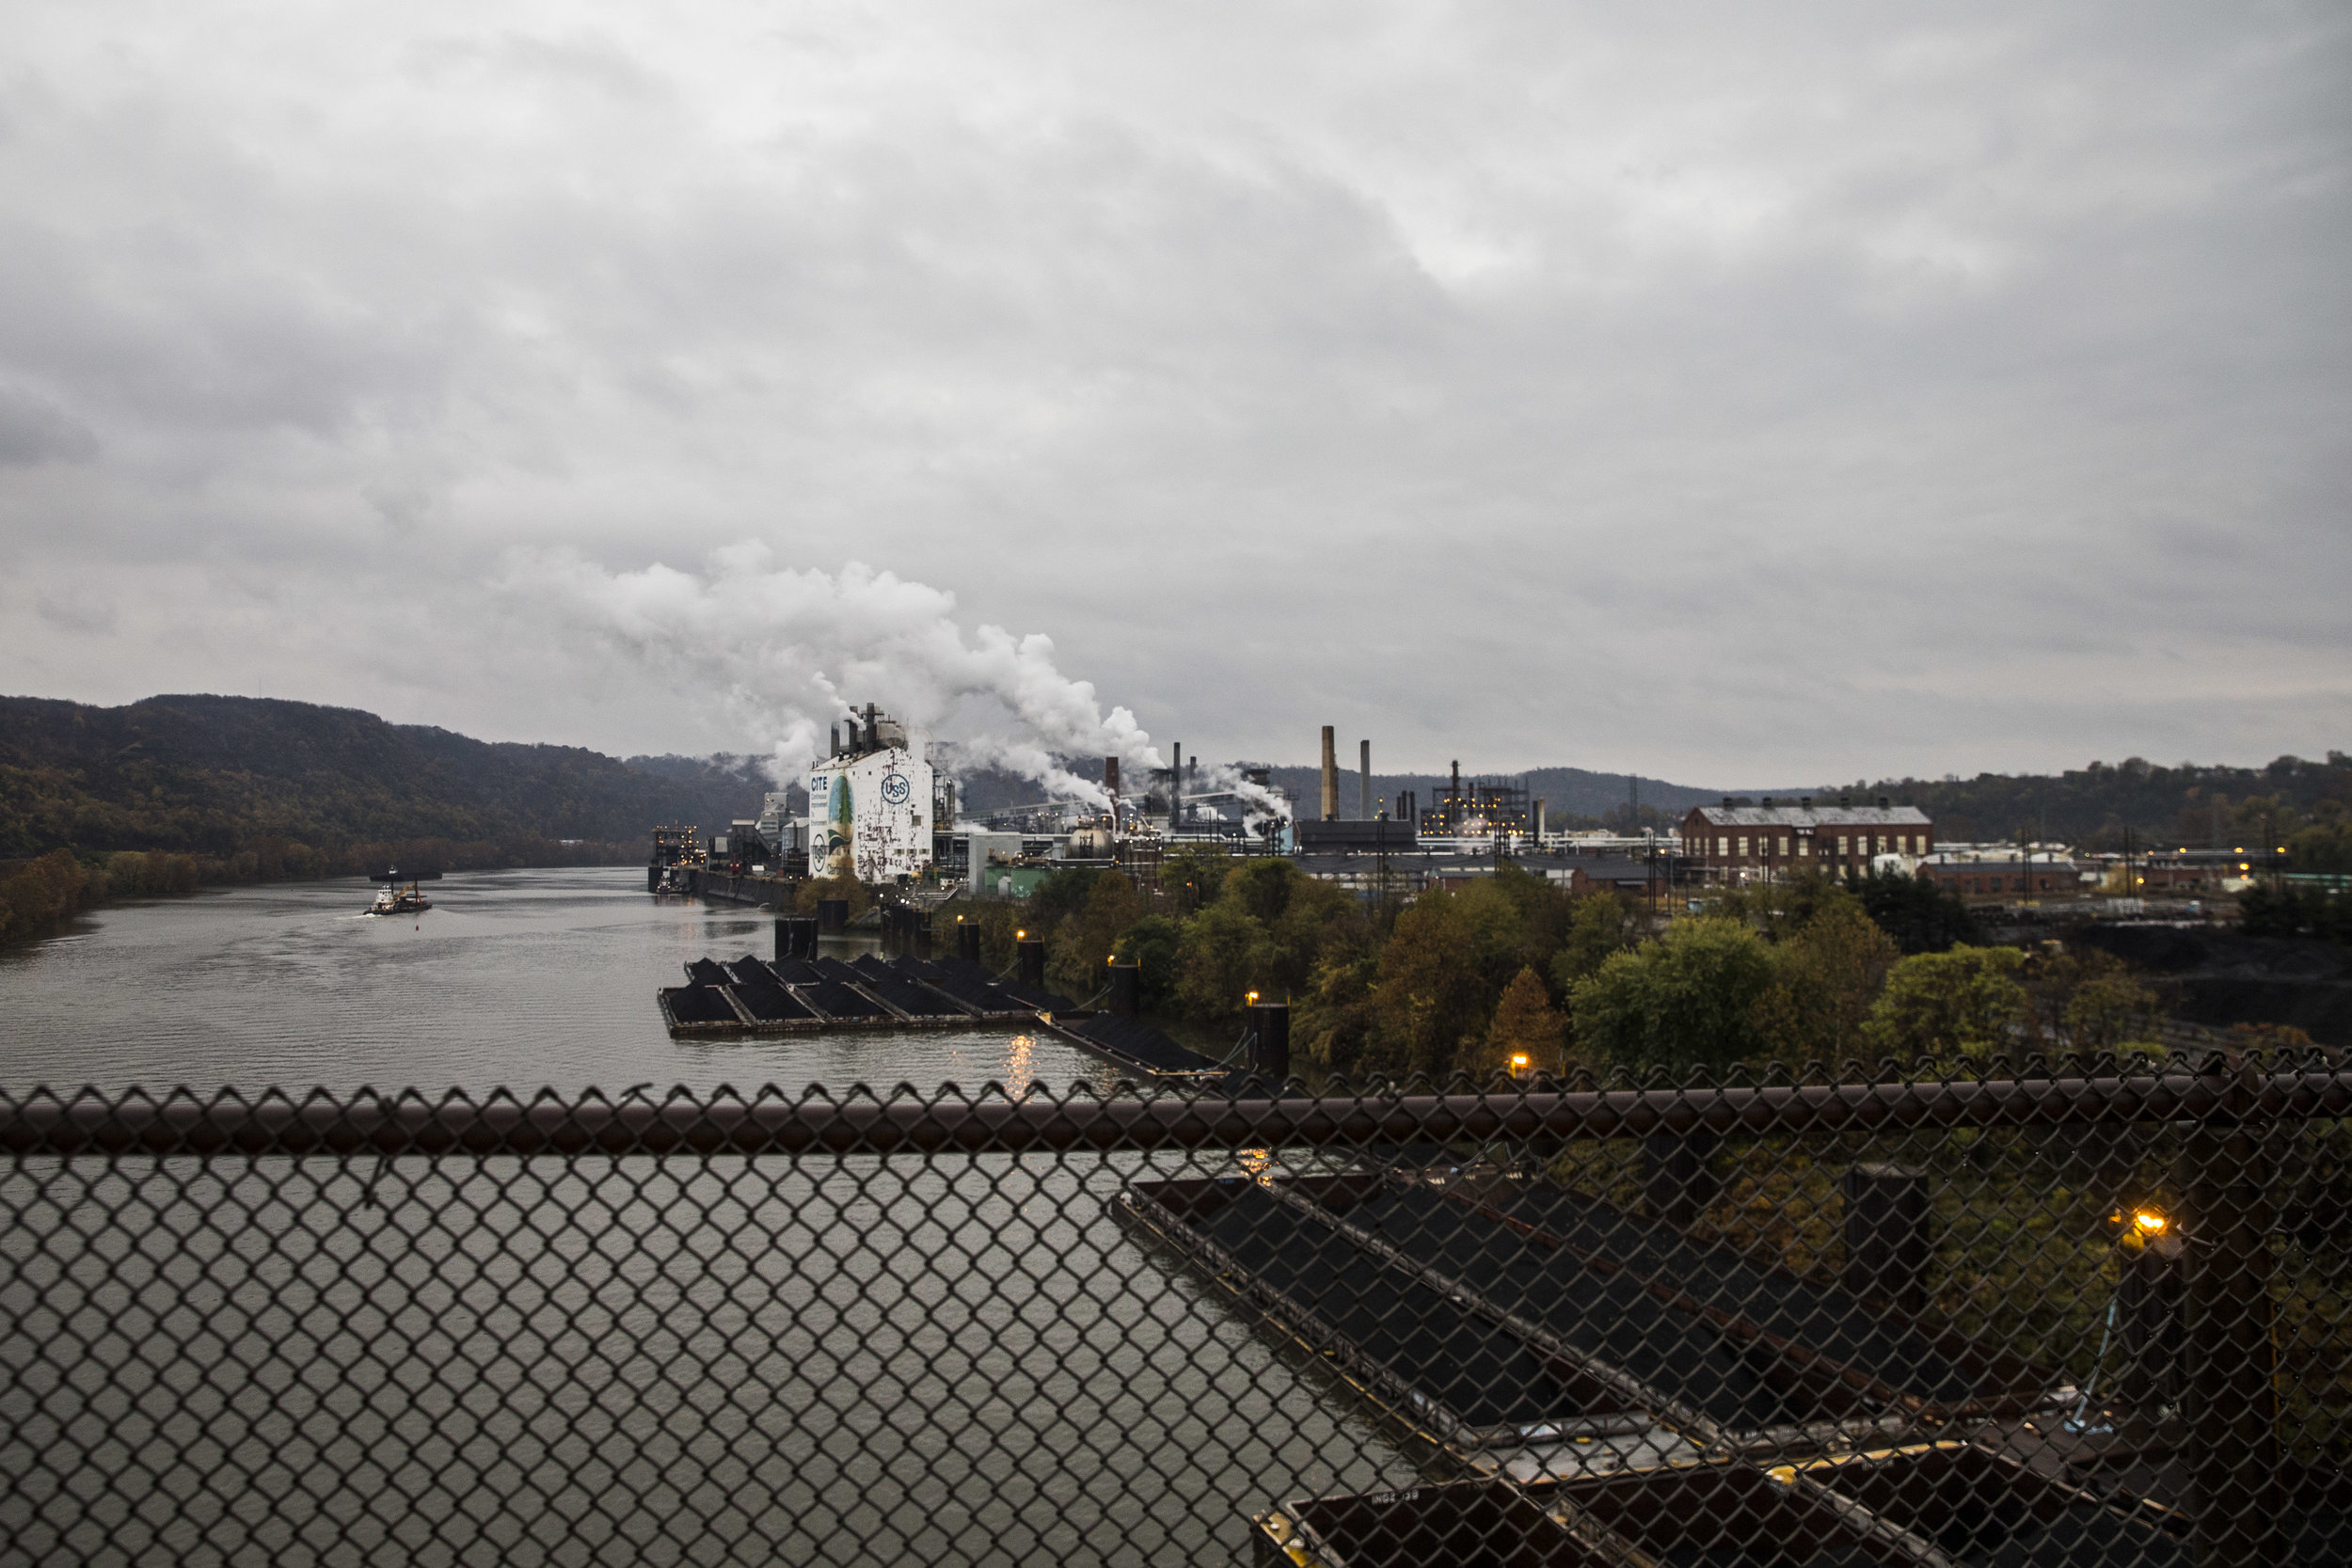  Clairton, Pennsylvania, is one of a few coal factories that are still operating in the surrounding area. Locals though feel depressed as they say the salaries are shrinking and more and more contracts are given to those affiliated with the factory's